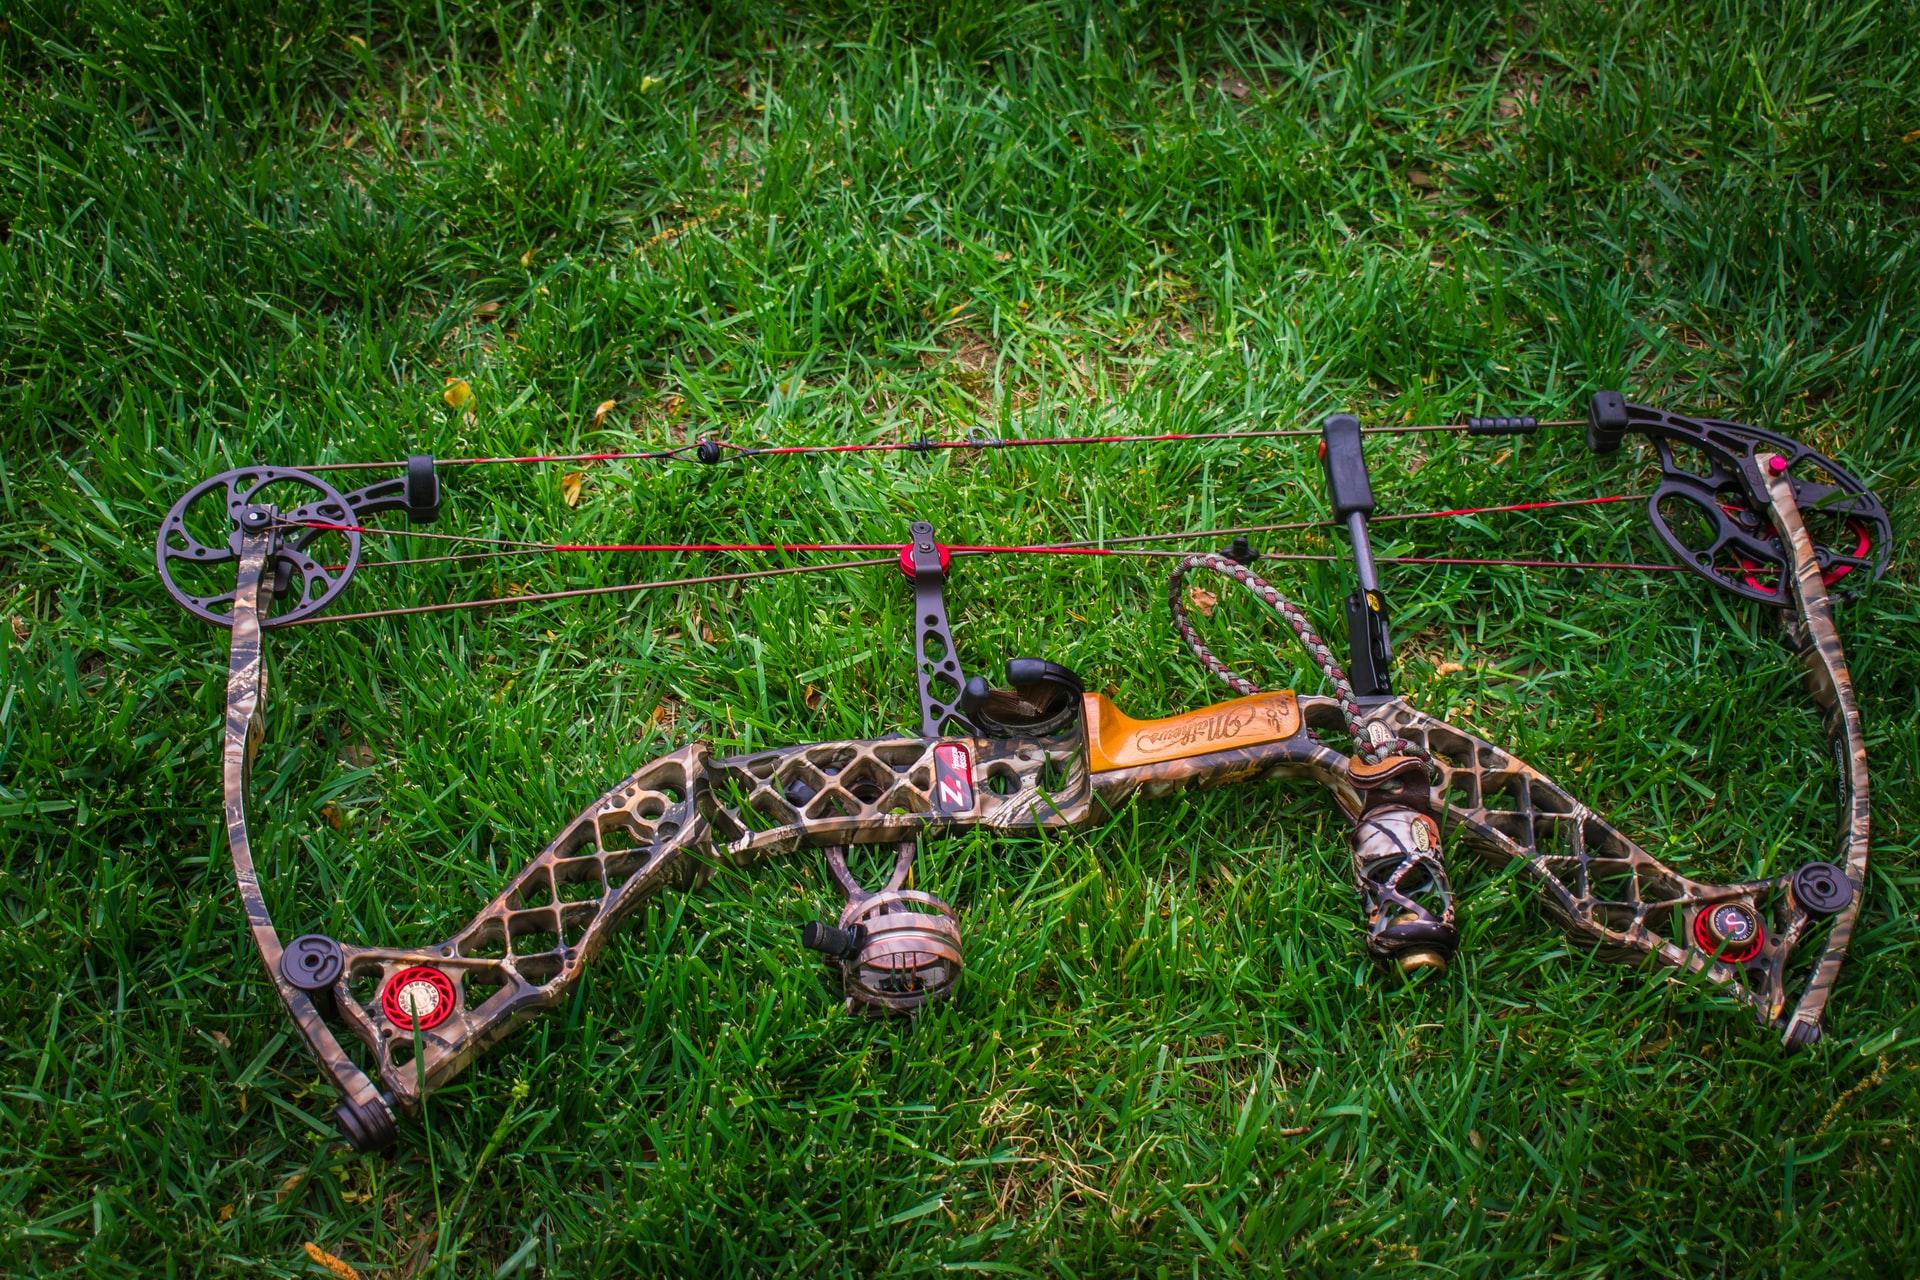 How Far Can a Compound Bow Shoot?